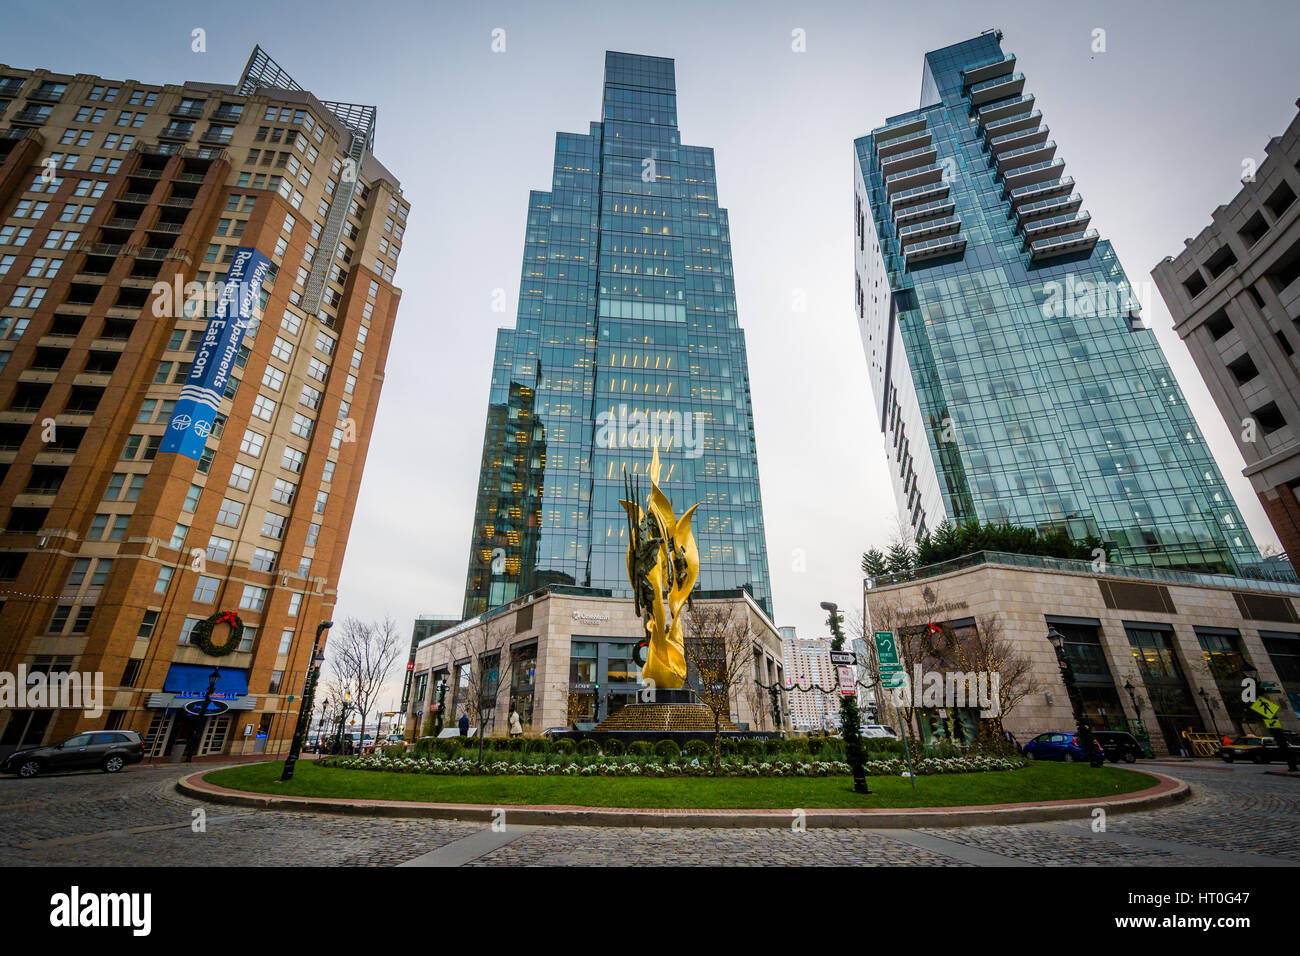 The National Katyń Memorial and modern buildings in Harbor East, Baltimore, Maryland. Stock Photo